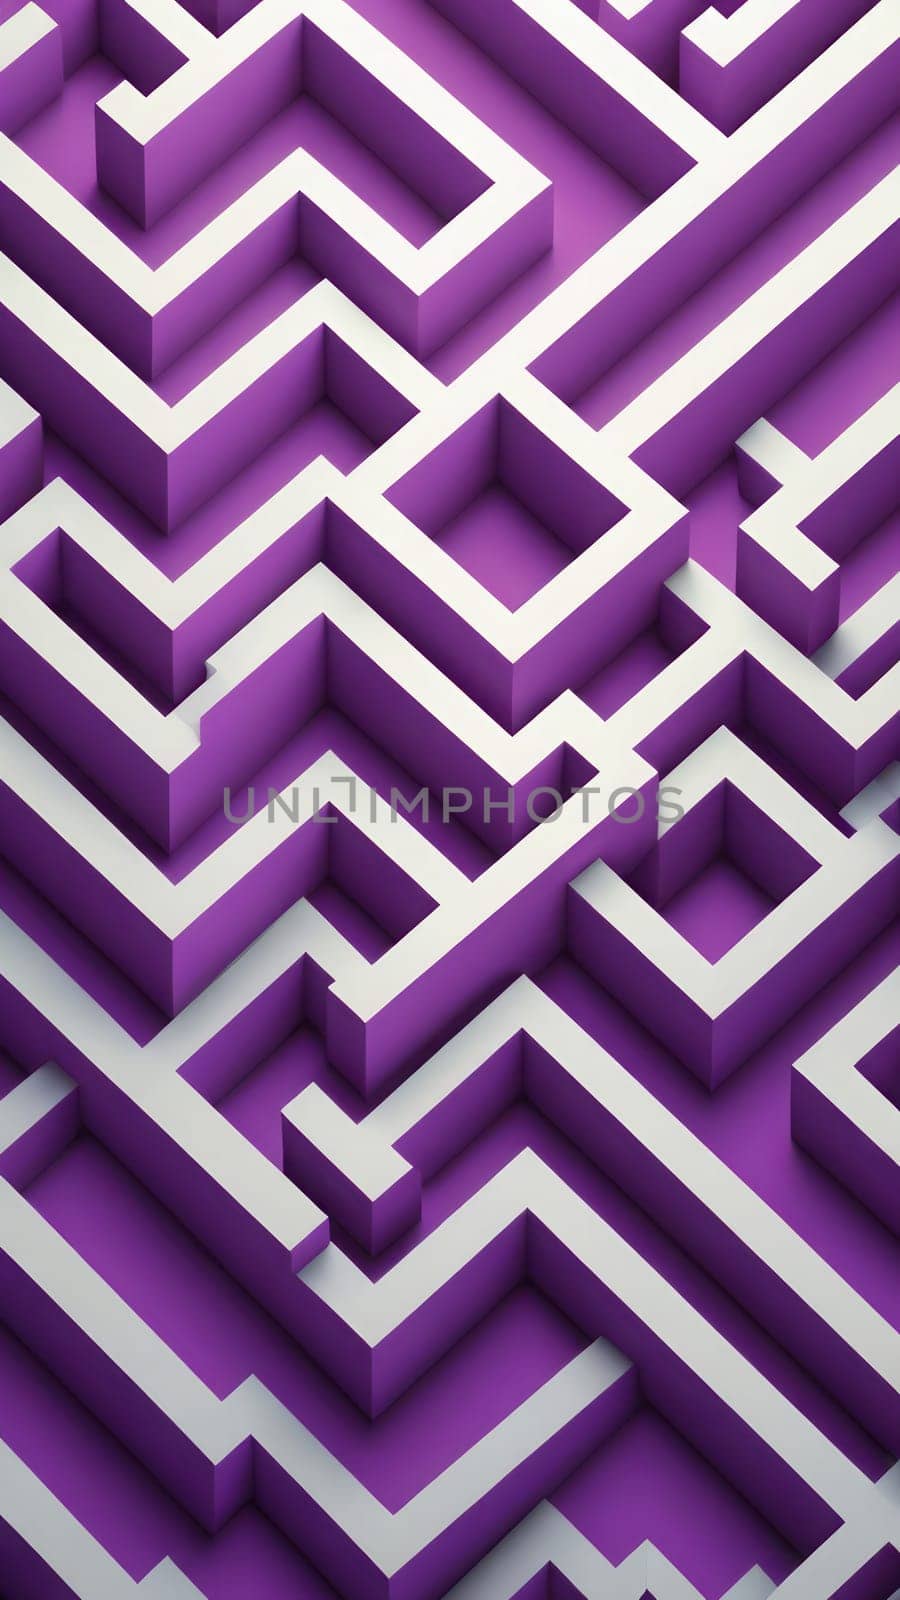 Creativity in paints from Labyrinth and purple by nkotlyar